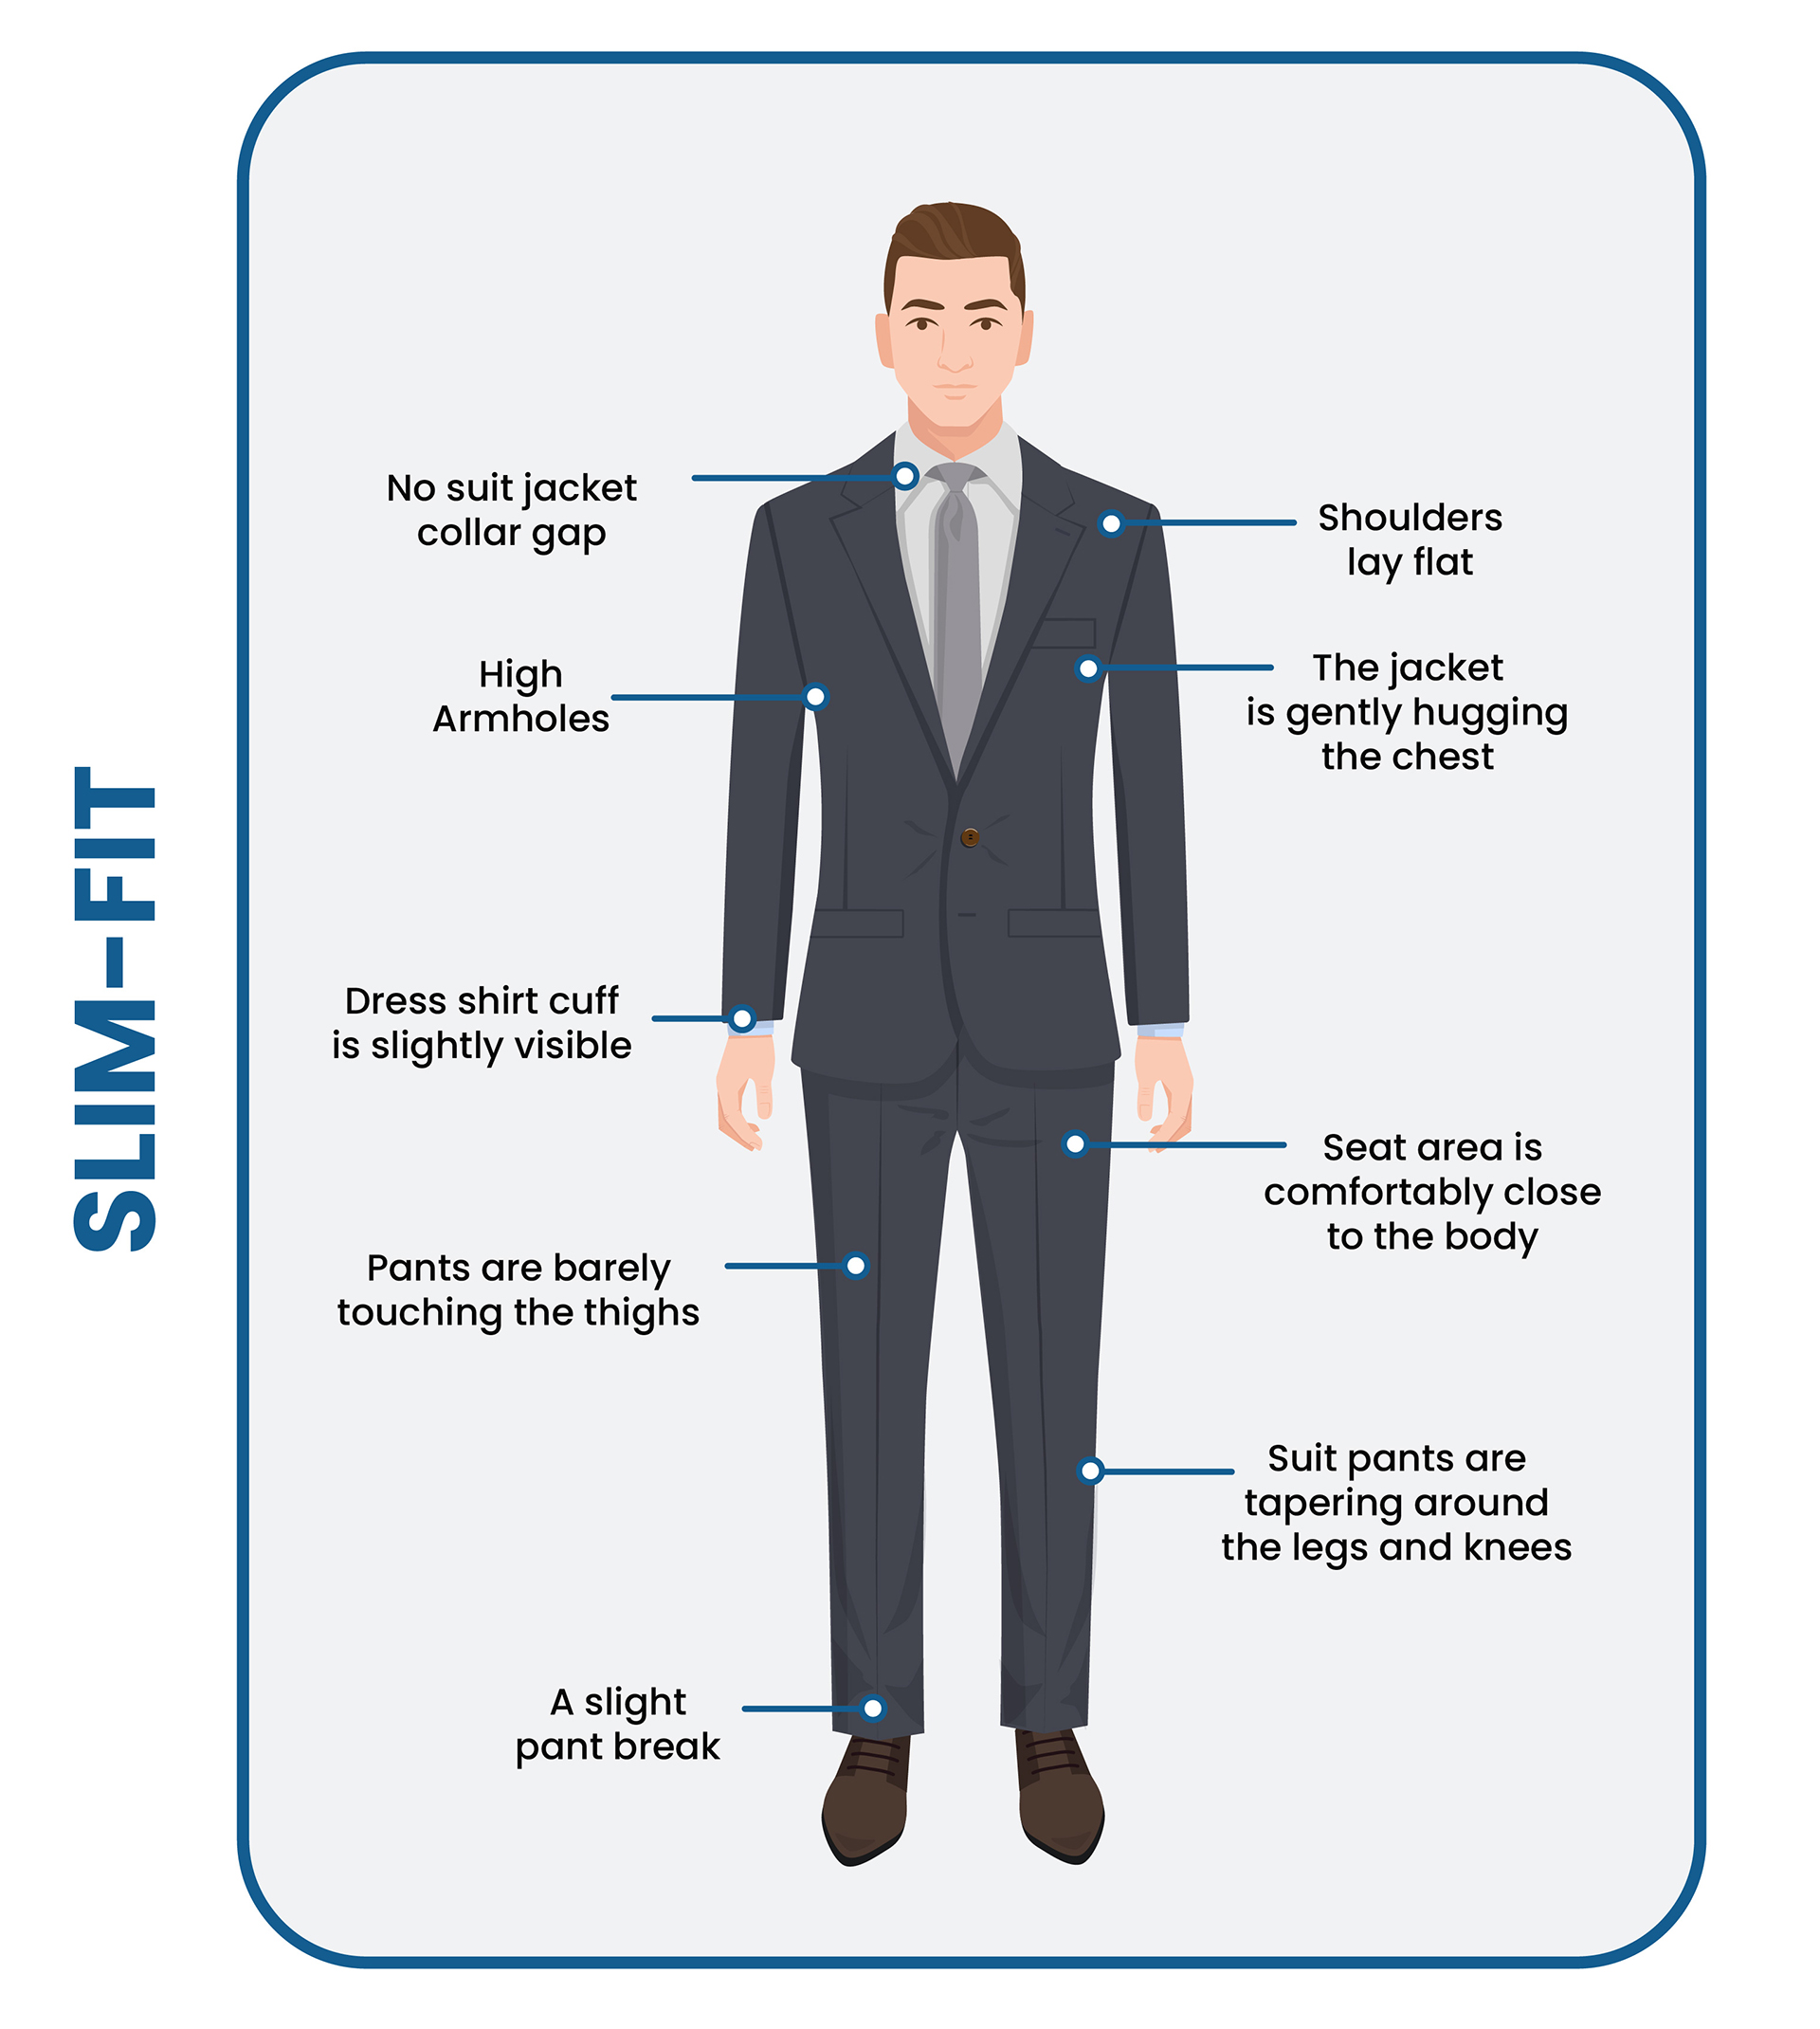 Men's Suit Styles: A Guide To The Best Types To Wear, 54% OFF